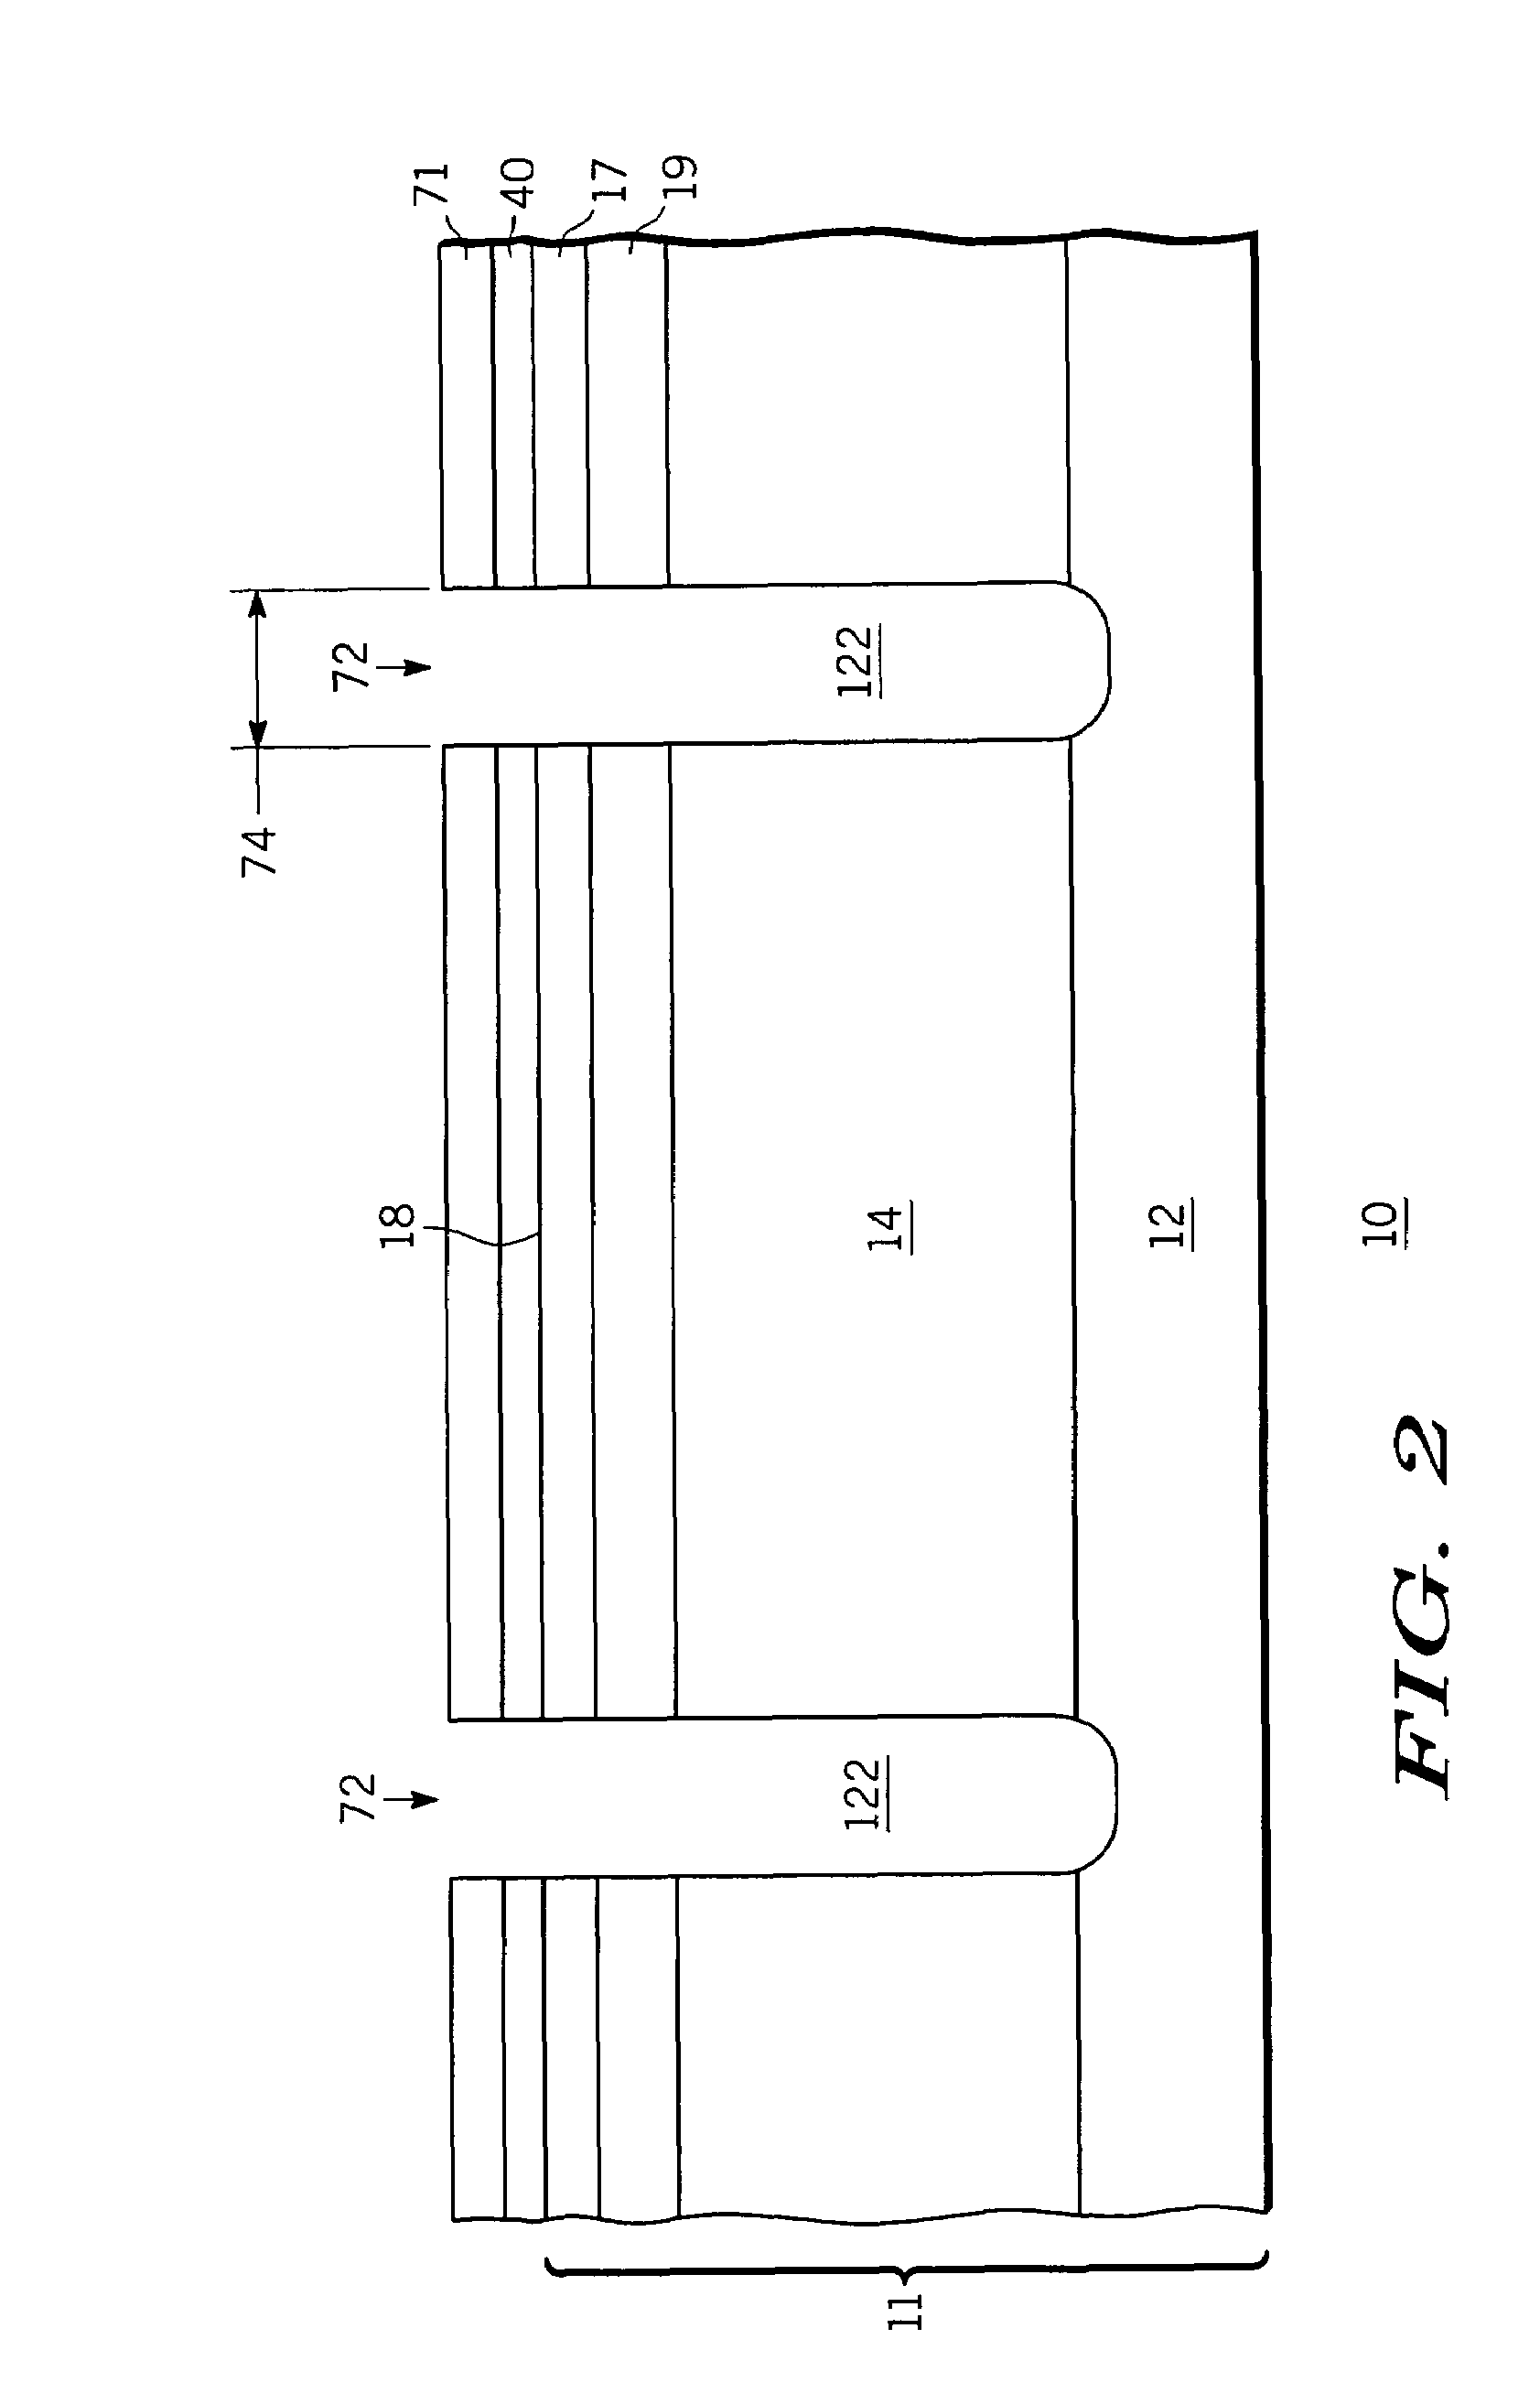 Superjunction semiconductor device structure